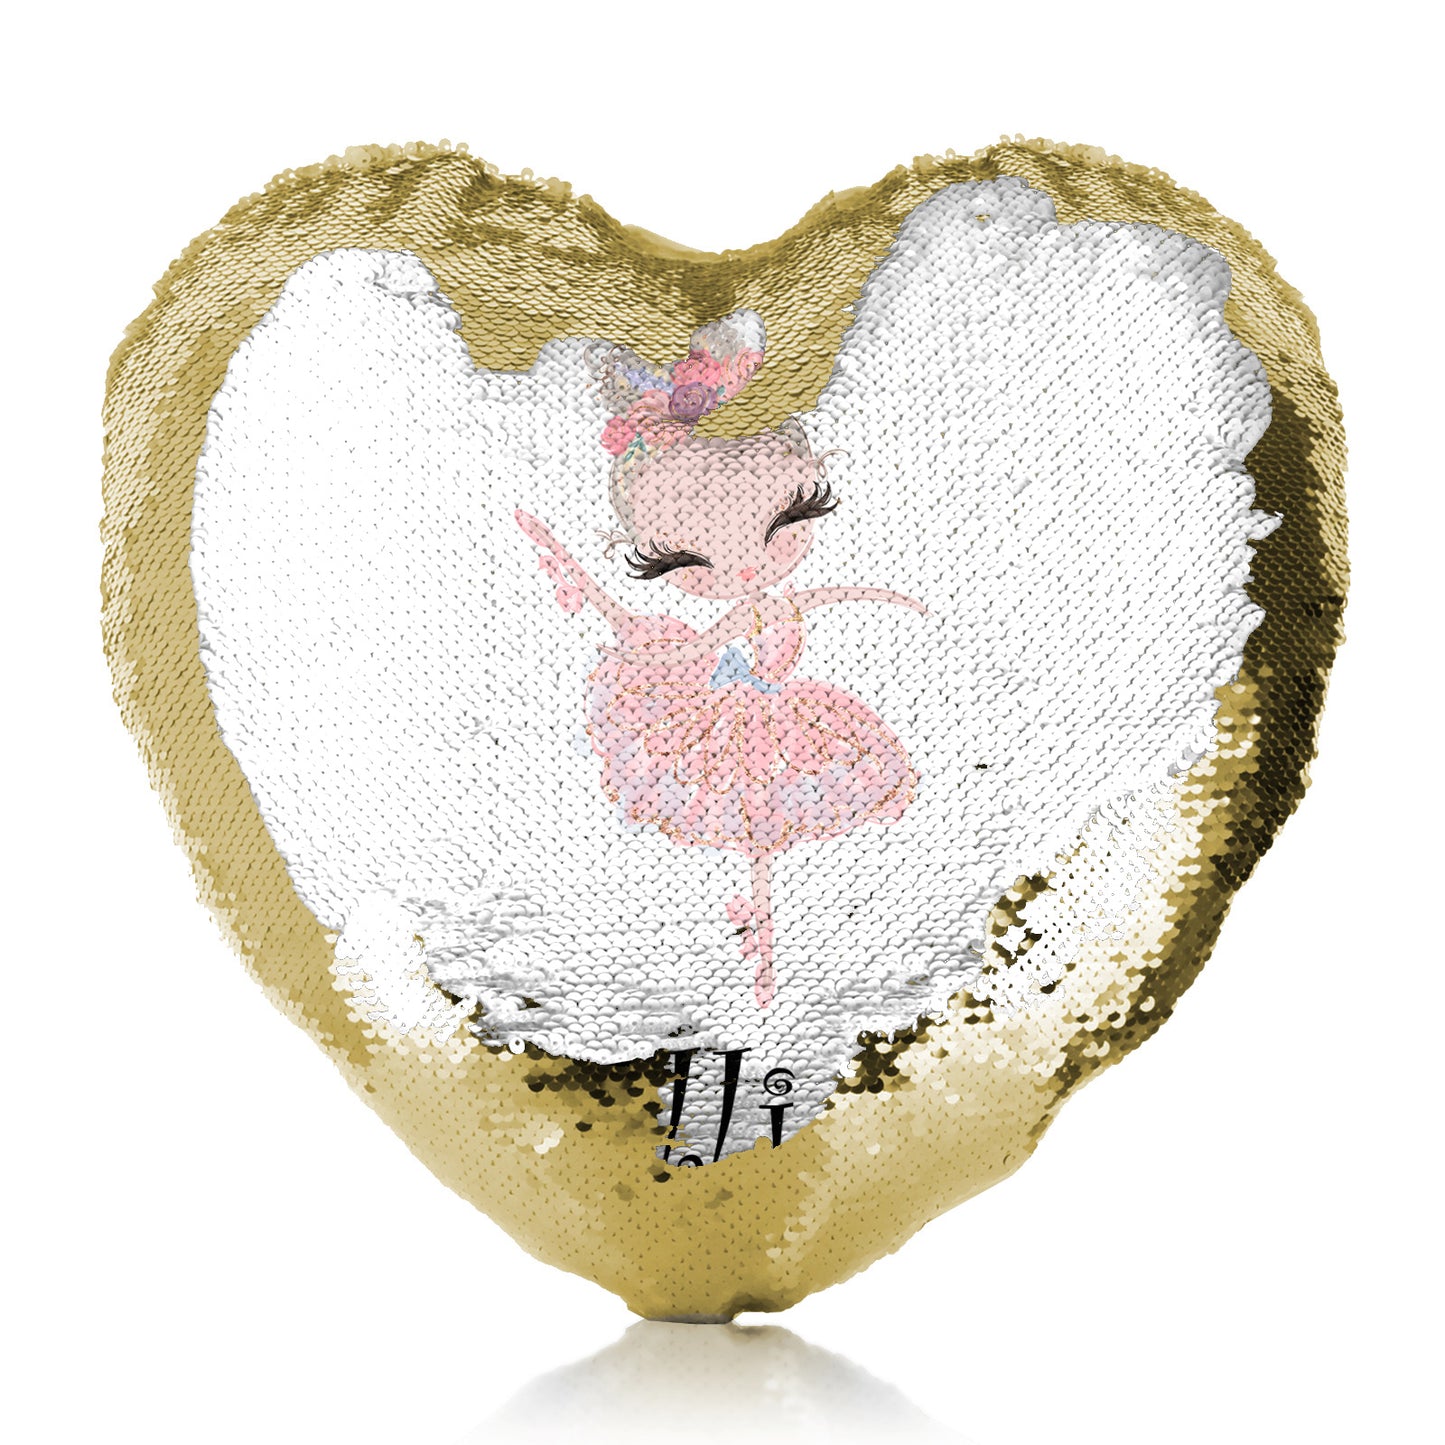 Personalised Sequin Heart Cushion with Cute Text and Blonde Hair Pink Dress Ballerina